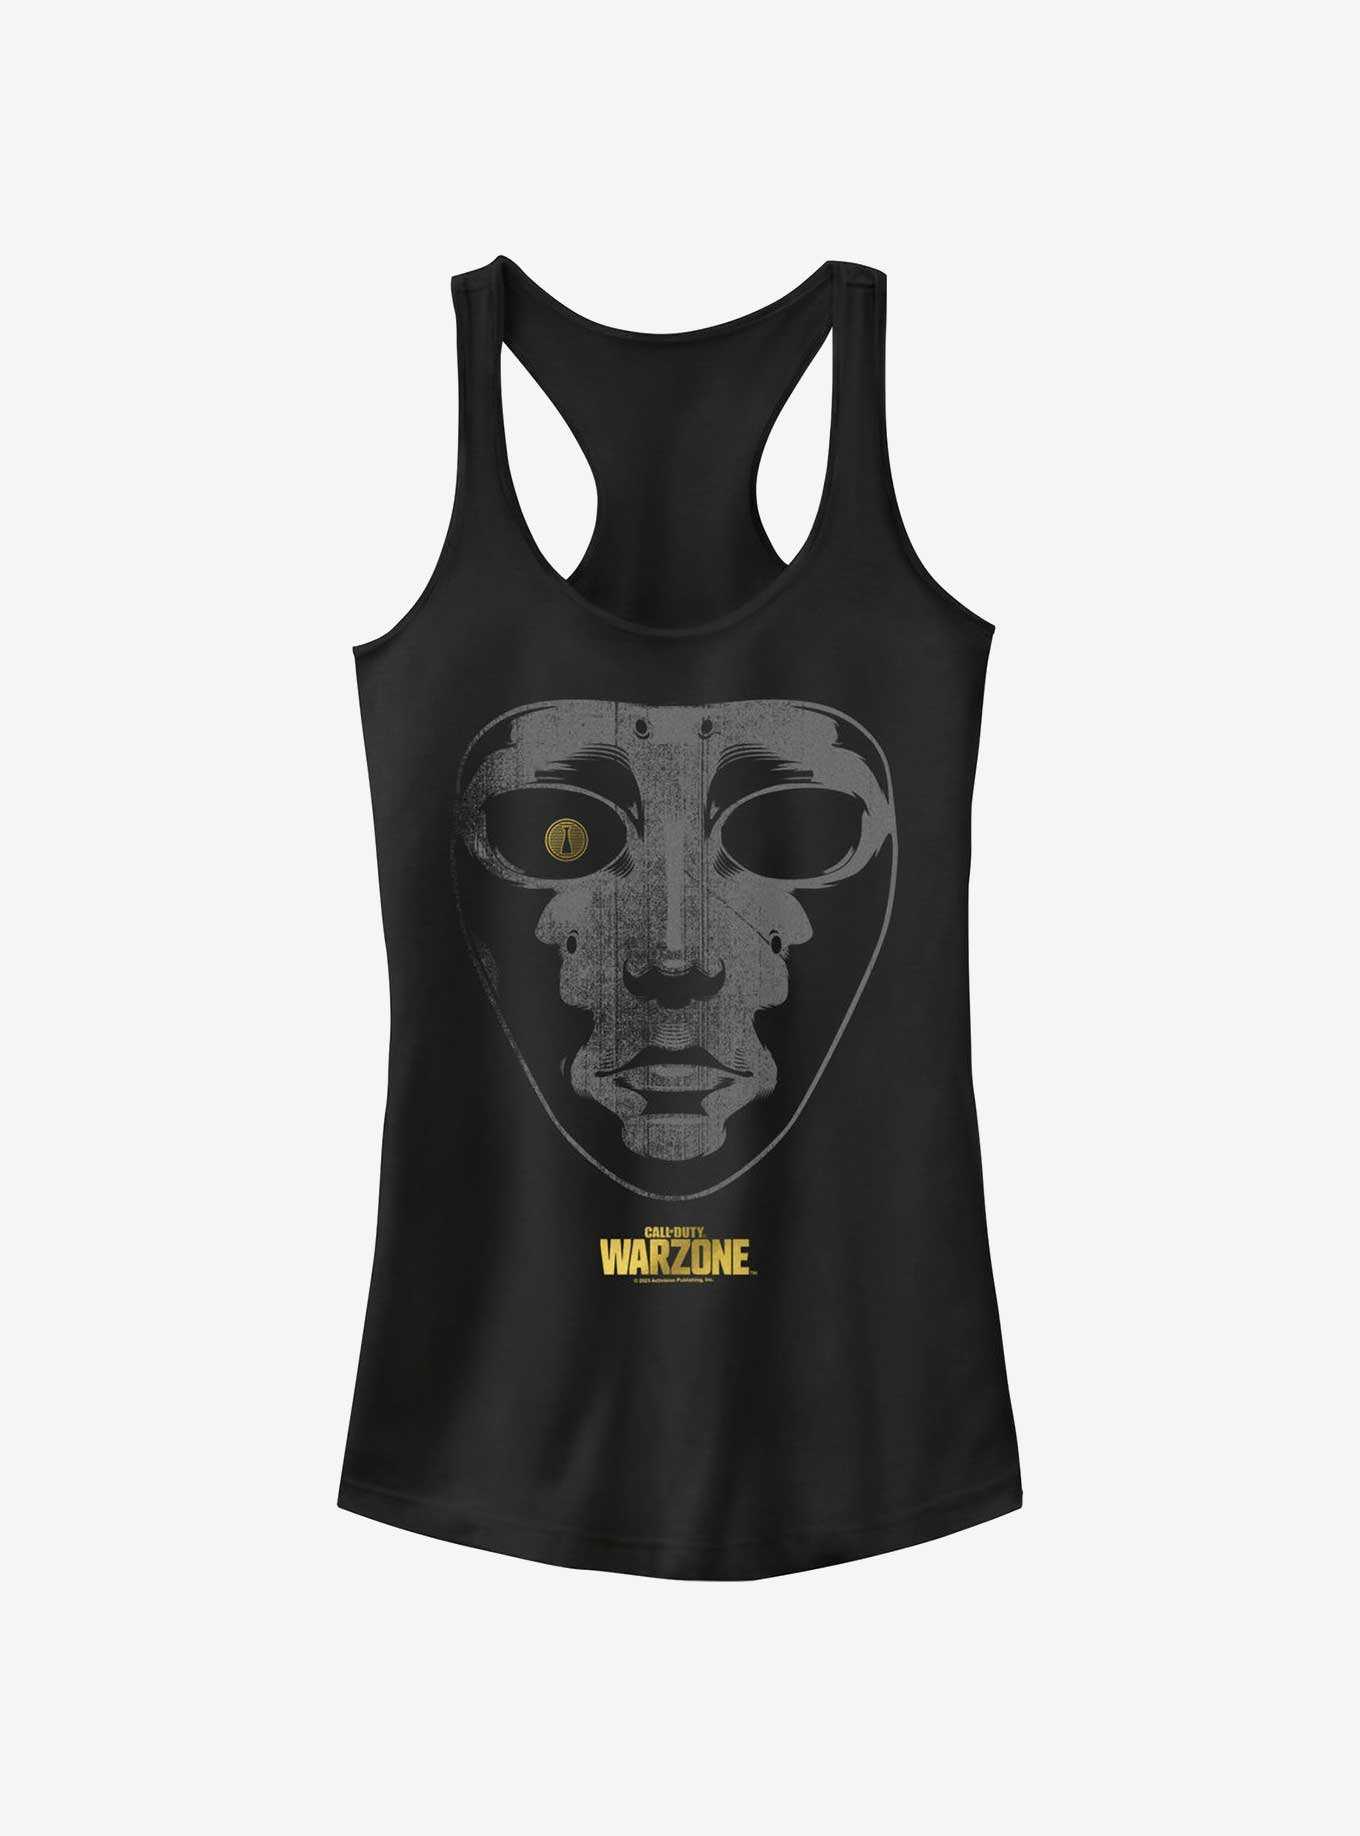 Call of Duty: Warzone Roze Mask Girls Tank, , hi-res